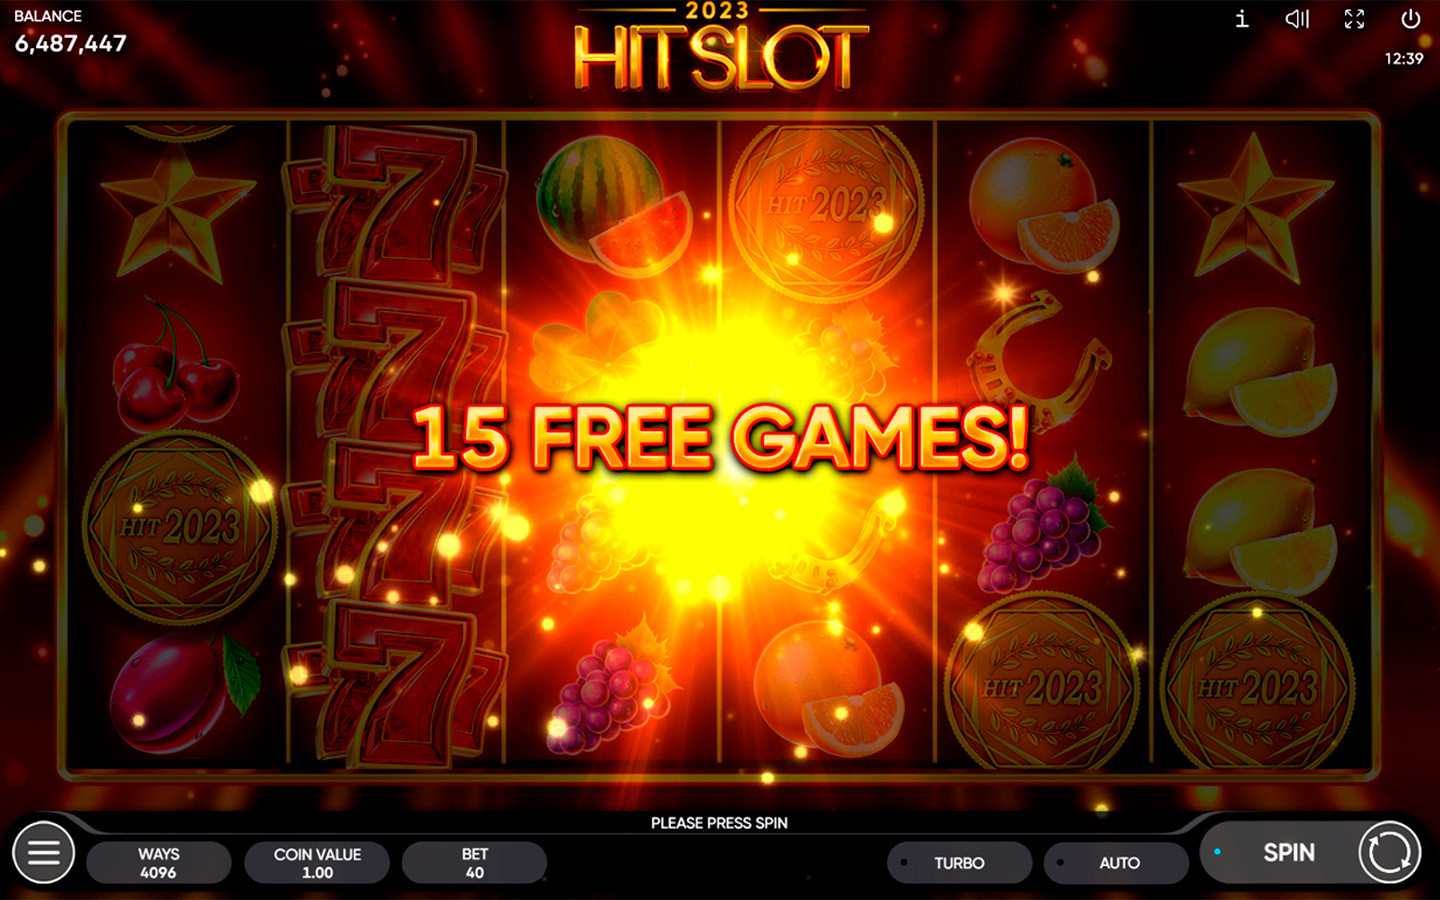 NEW SLOT SOFTWARE AVAILABLE FOR CASINOS | 2023 HIT SLOT has been launched by Endorphina!